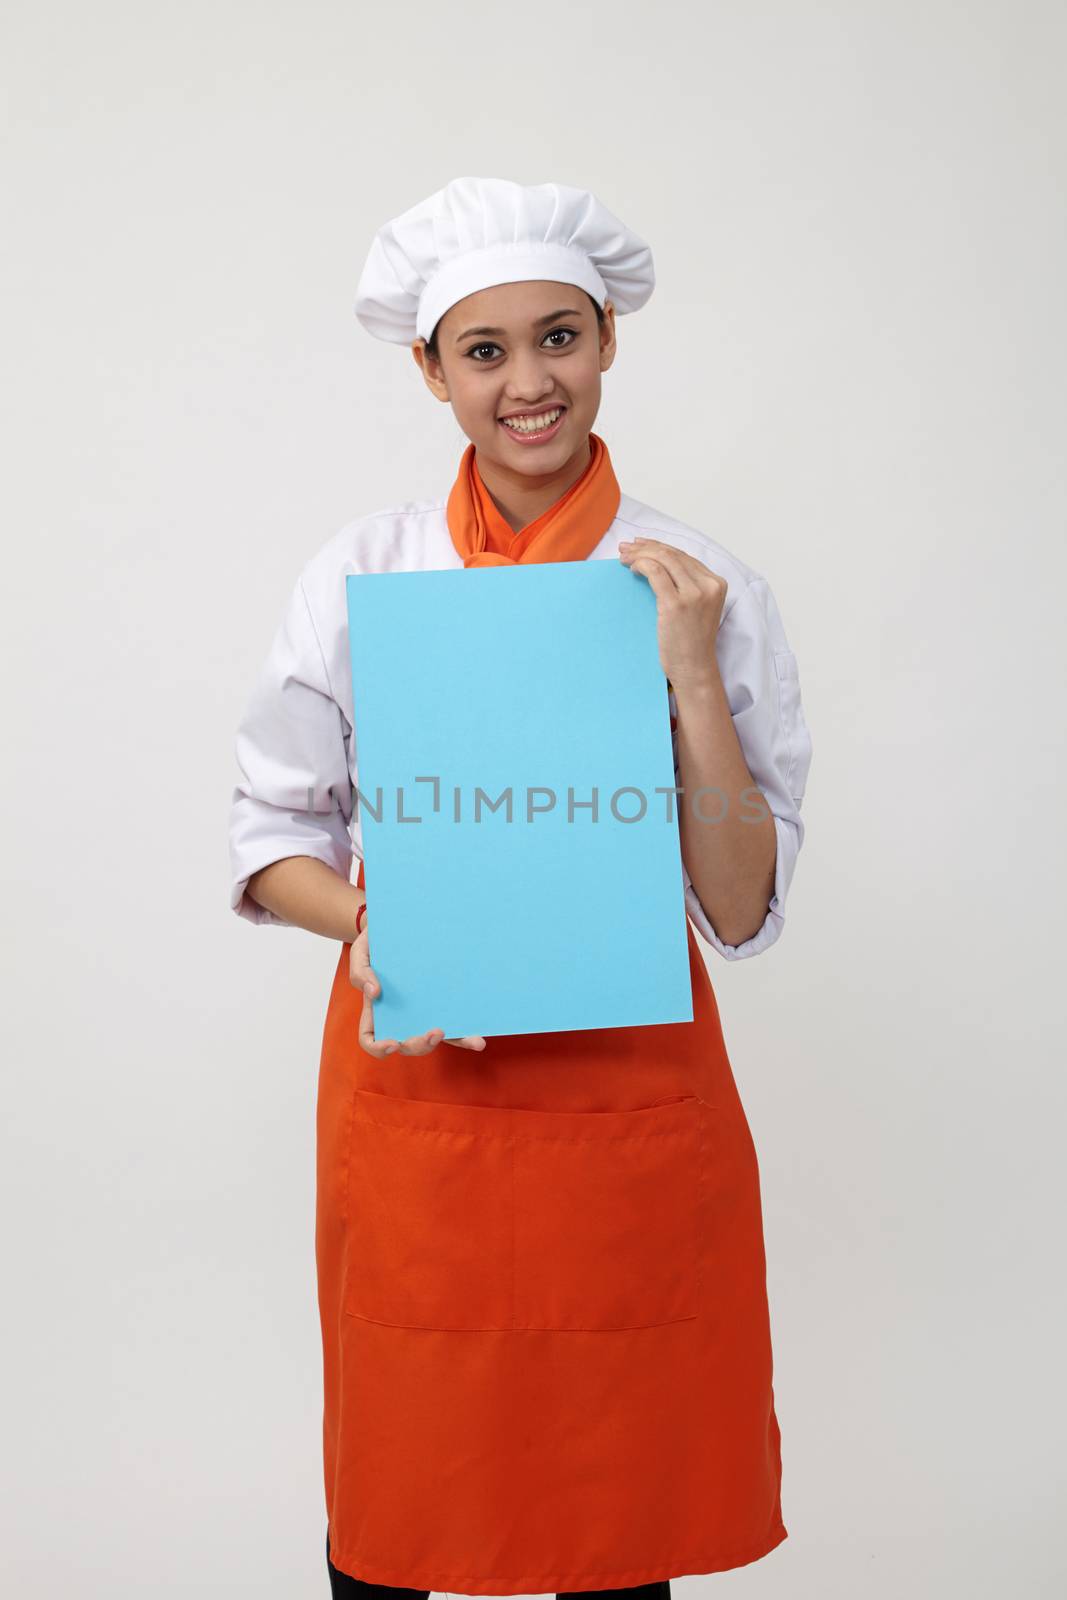 Indian woman with chef uniform holding a blank card